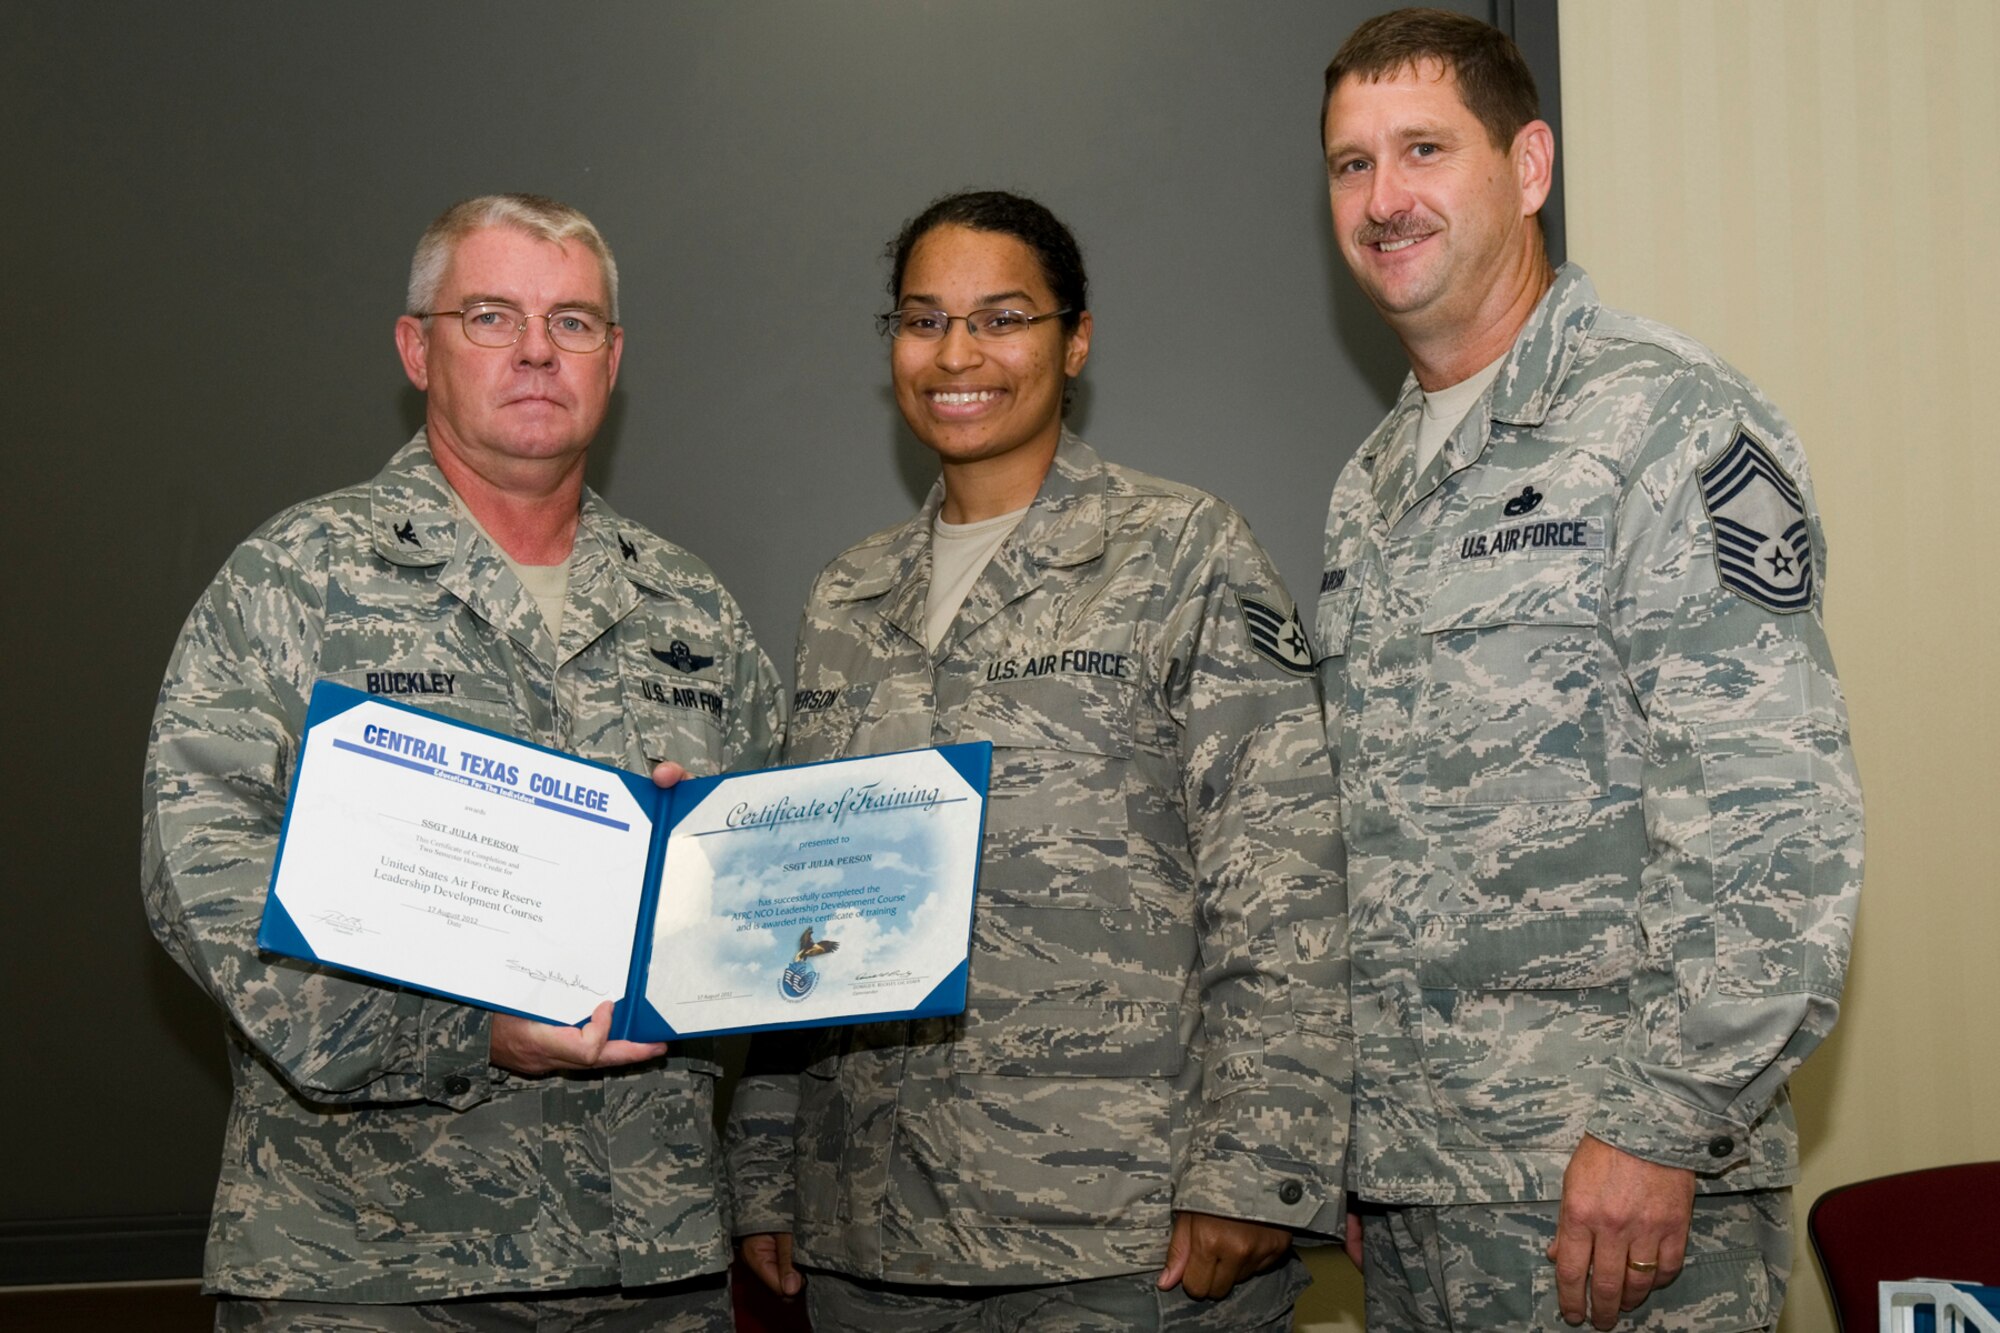 GRISSOM AIR RESERVE BASE, Ind. -- Staff Sgt. Julia Person, 434th Aircraft Maintenance Squadron KC-135 crew chief, receives a certificate of training from Col. Don Buckley, 434th Air Refueling Wing commander, and Chief Master Sergeant James Burba, 434th Maintenance Operations Flight maintenance superintendent, at a graduation ceremony for a Non-Commissioned Officer Leadership Development Course here Aug. 17. Person graduated the course with 20 other NCOs. (U.S. Air Force photo/Senior Airman Andrew McLaughlin)